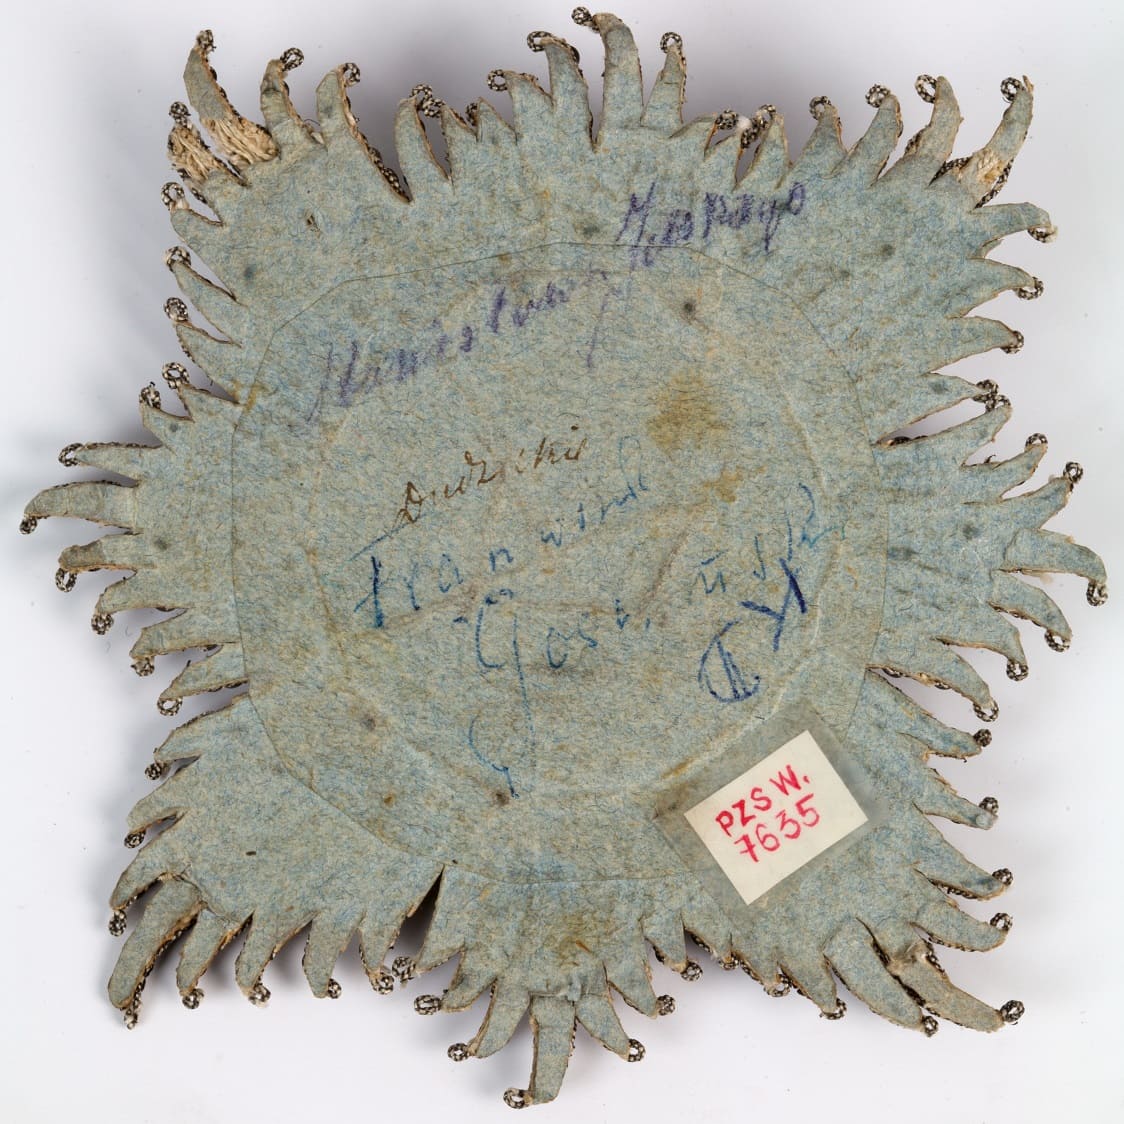 Breast star Polish Order of White  Eagle from  the collection of Wawel Royal Castle.jpg